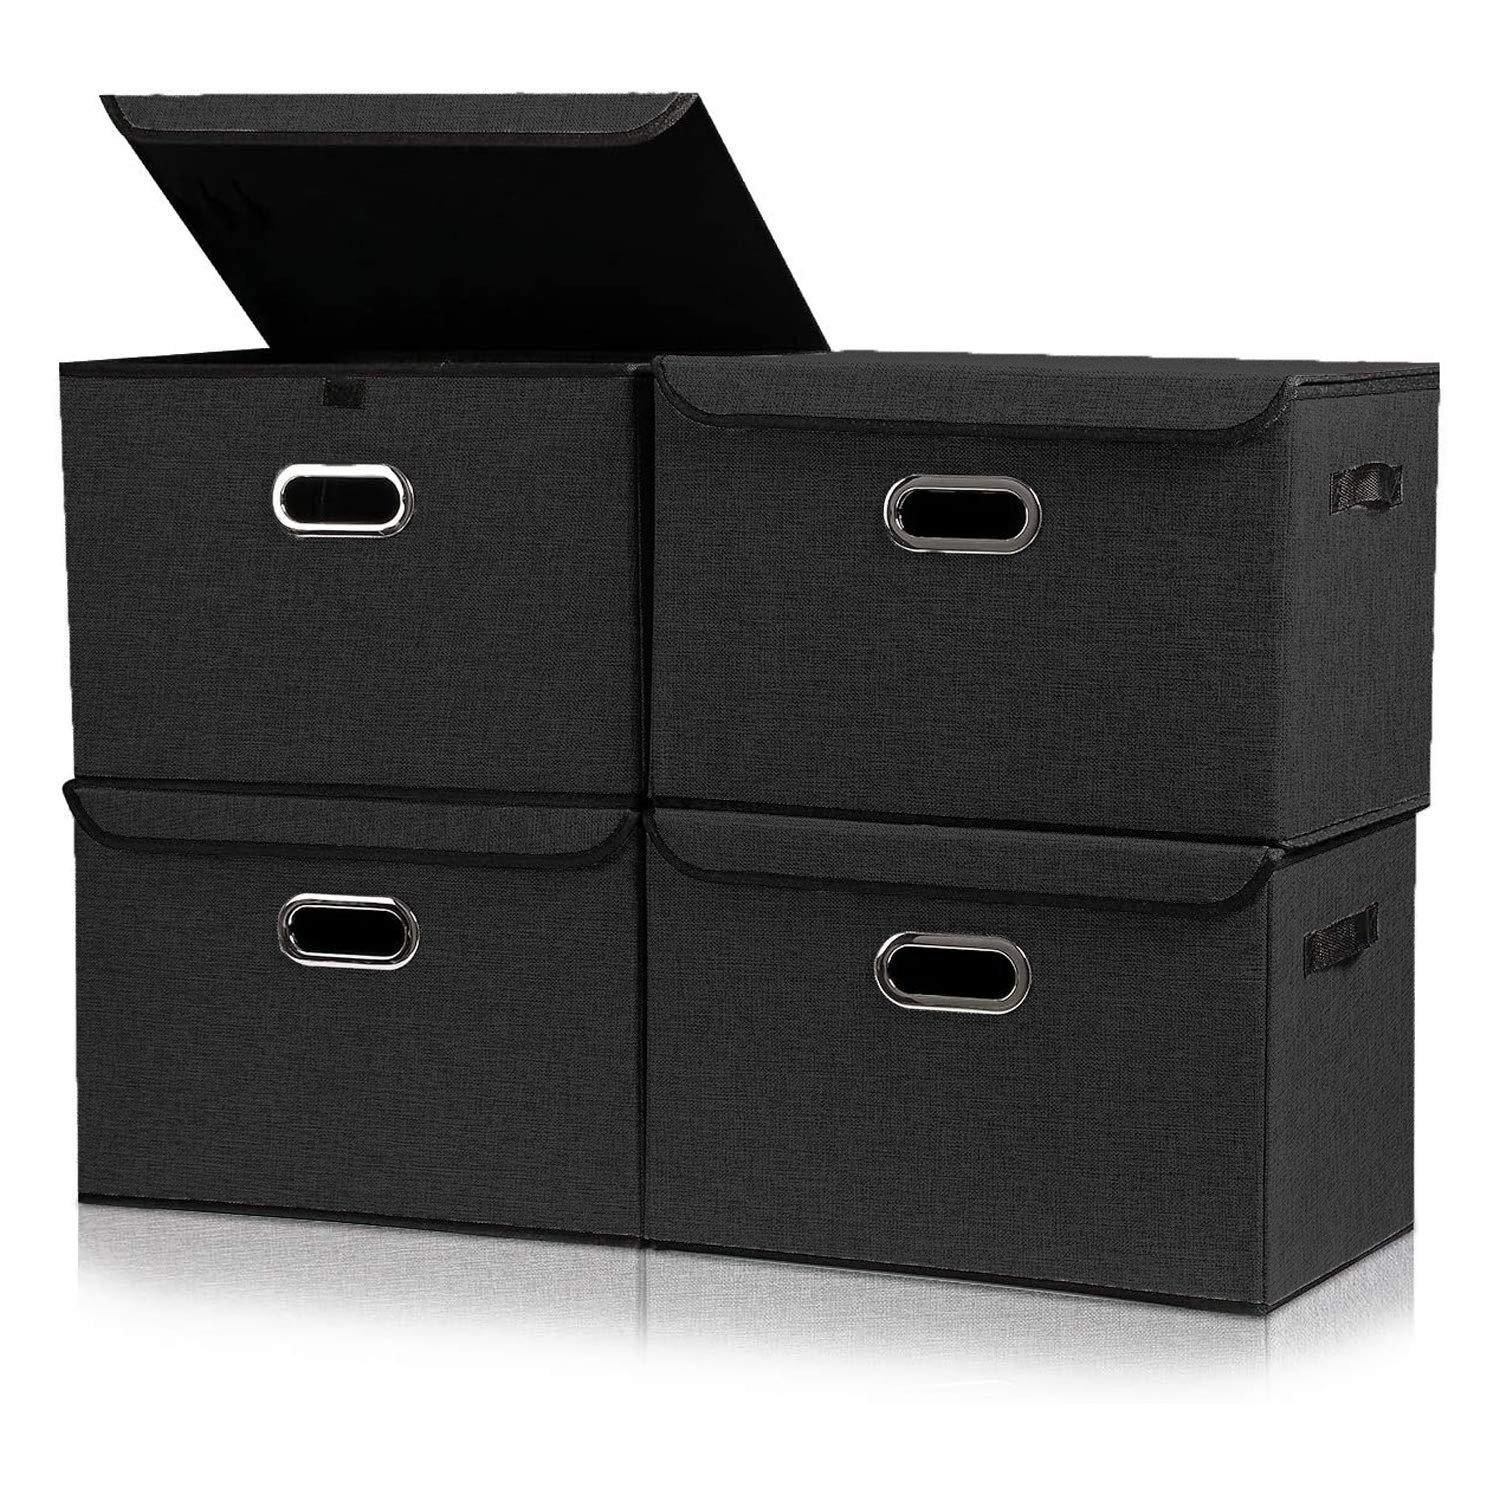 DOUBLE R BAGS Collapsible Storage Box with Lids Covers Large 4 Pack (Black) - Double R Bags